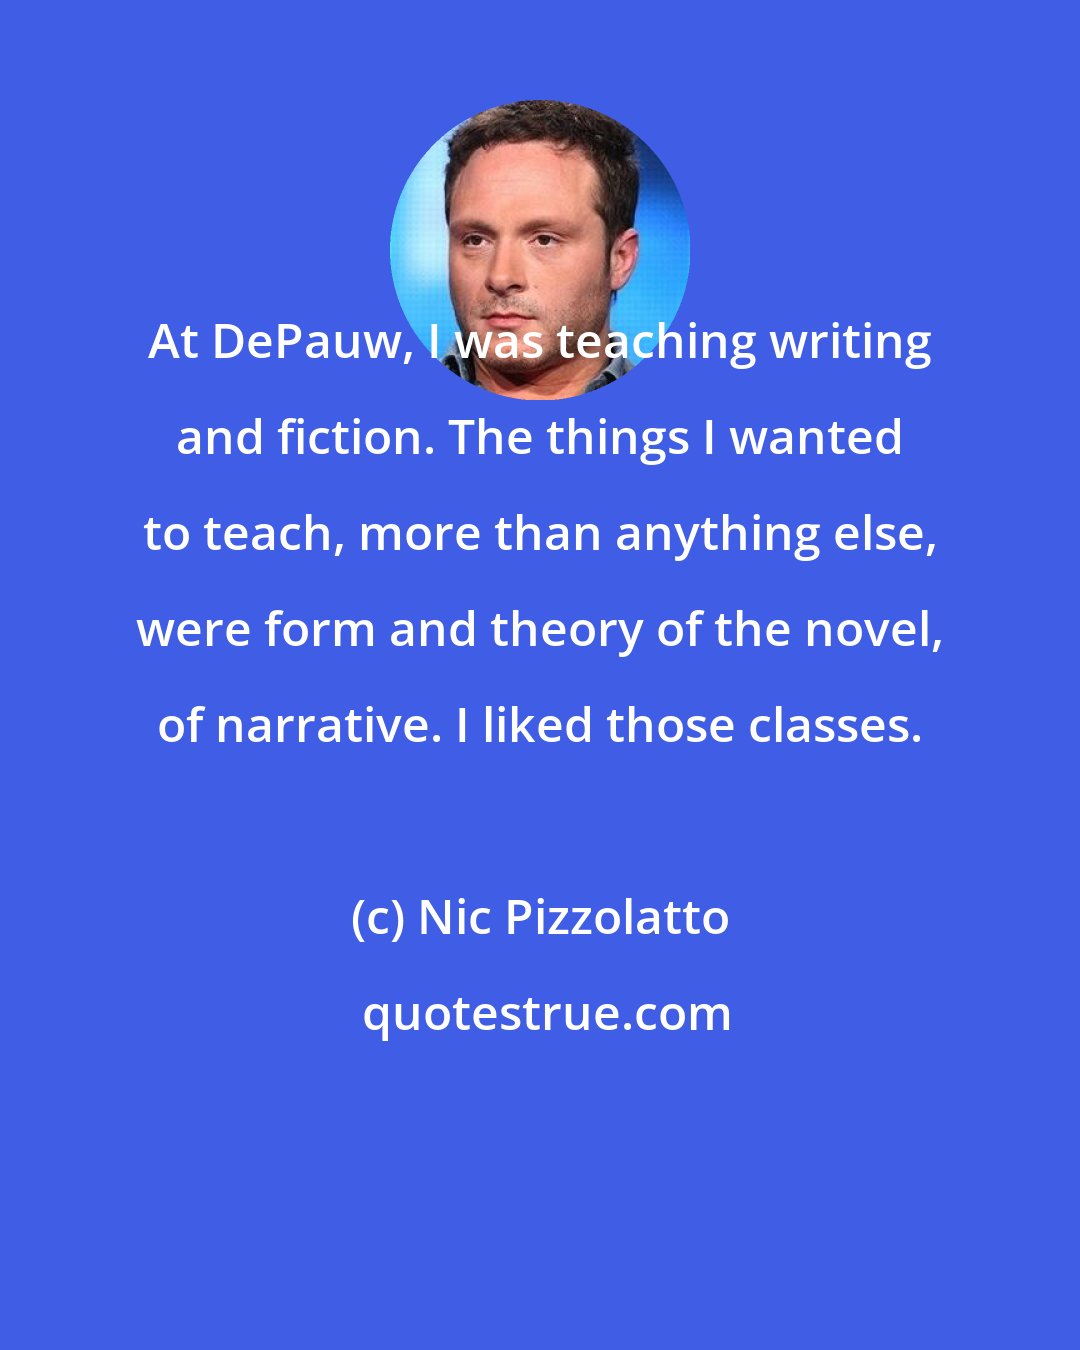 Nic Pizzolatto: At DePauw, I was teaching writing and fiction. The things I wanted to teach, more than anything else, were form and theory of the novel, of narrative. I liked those classes.